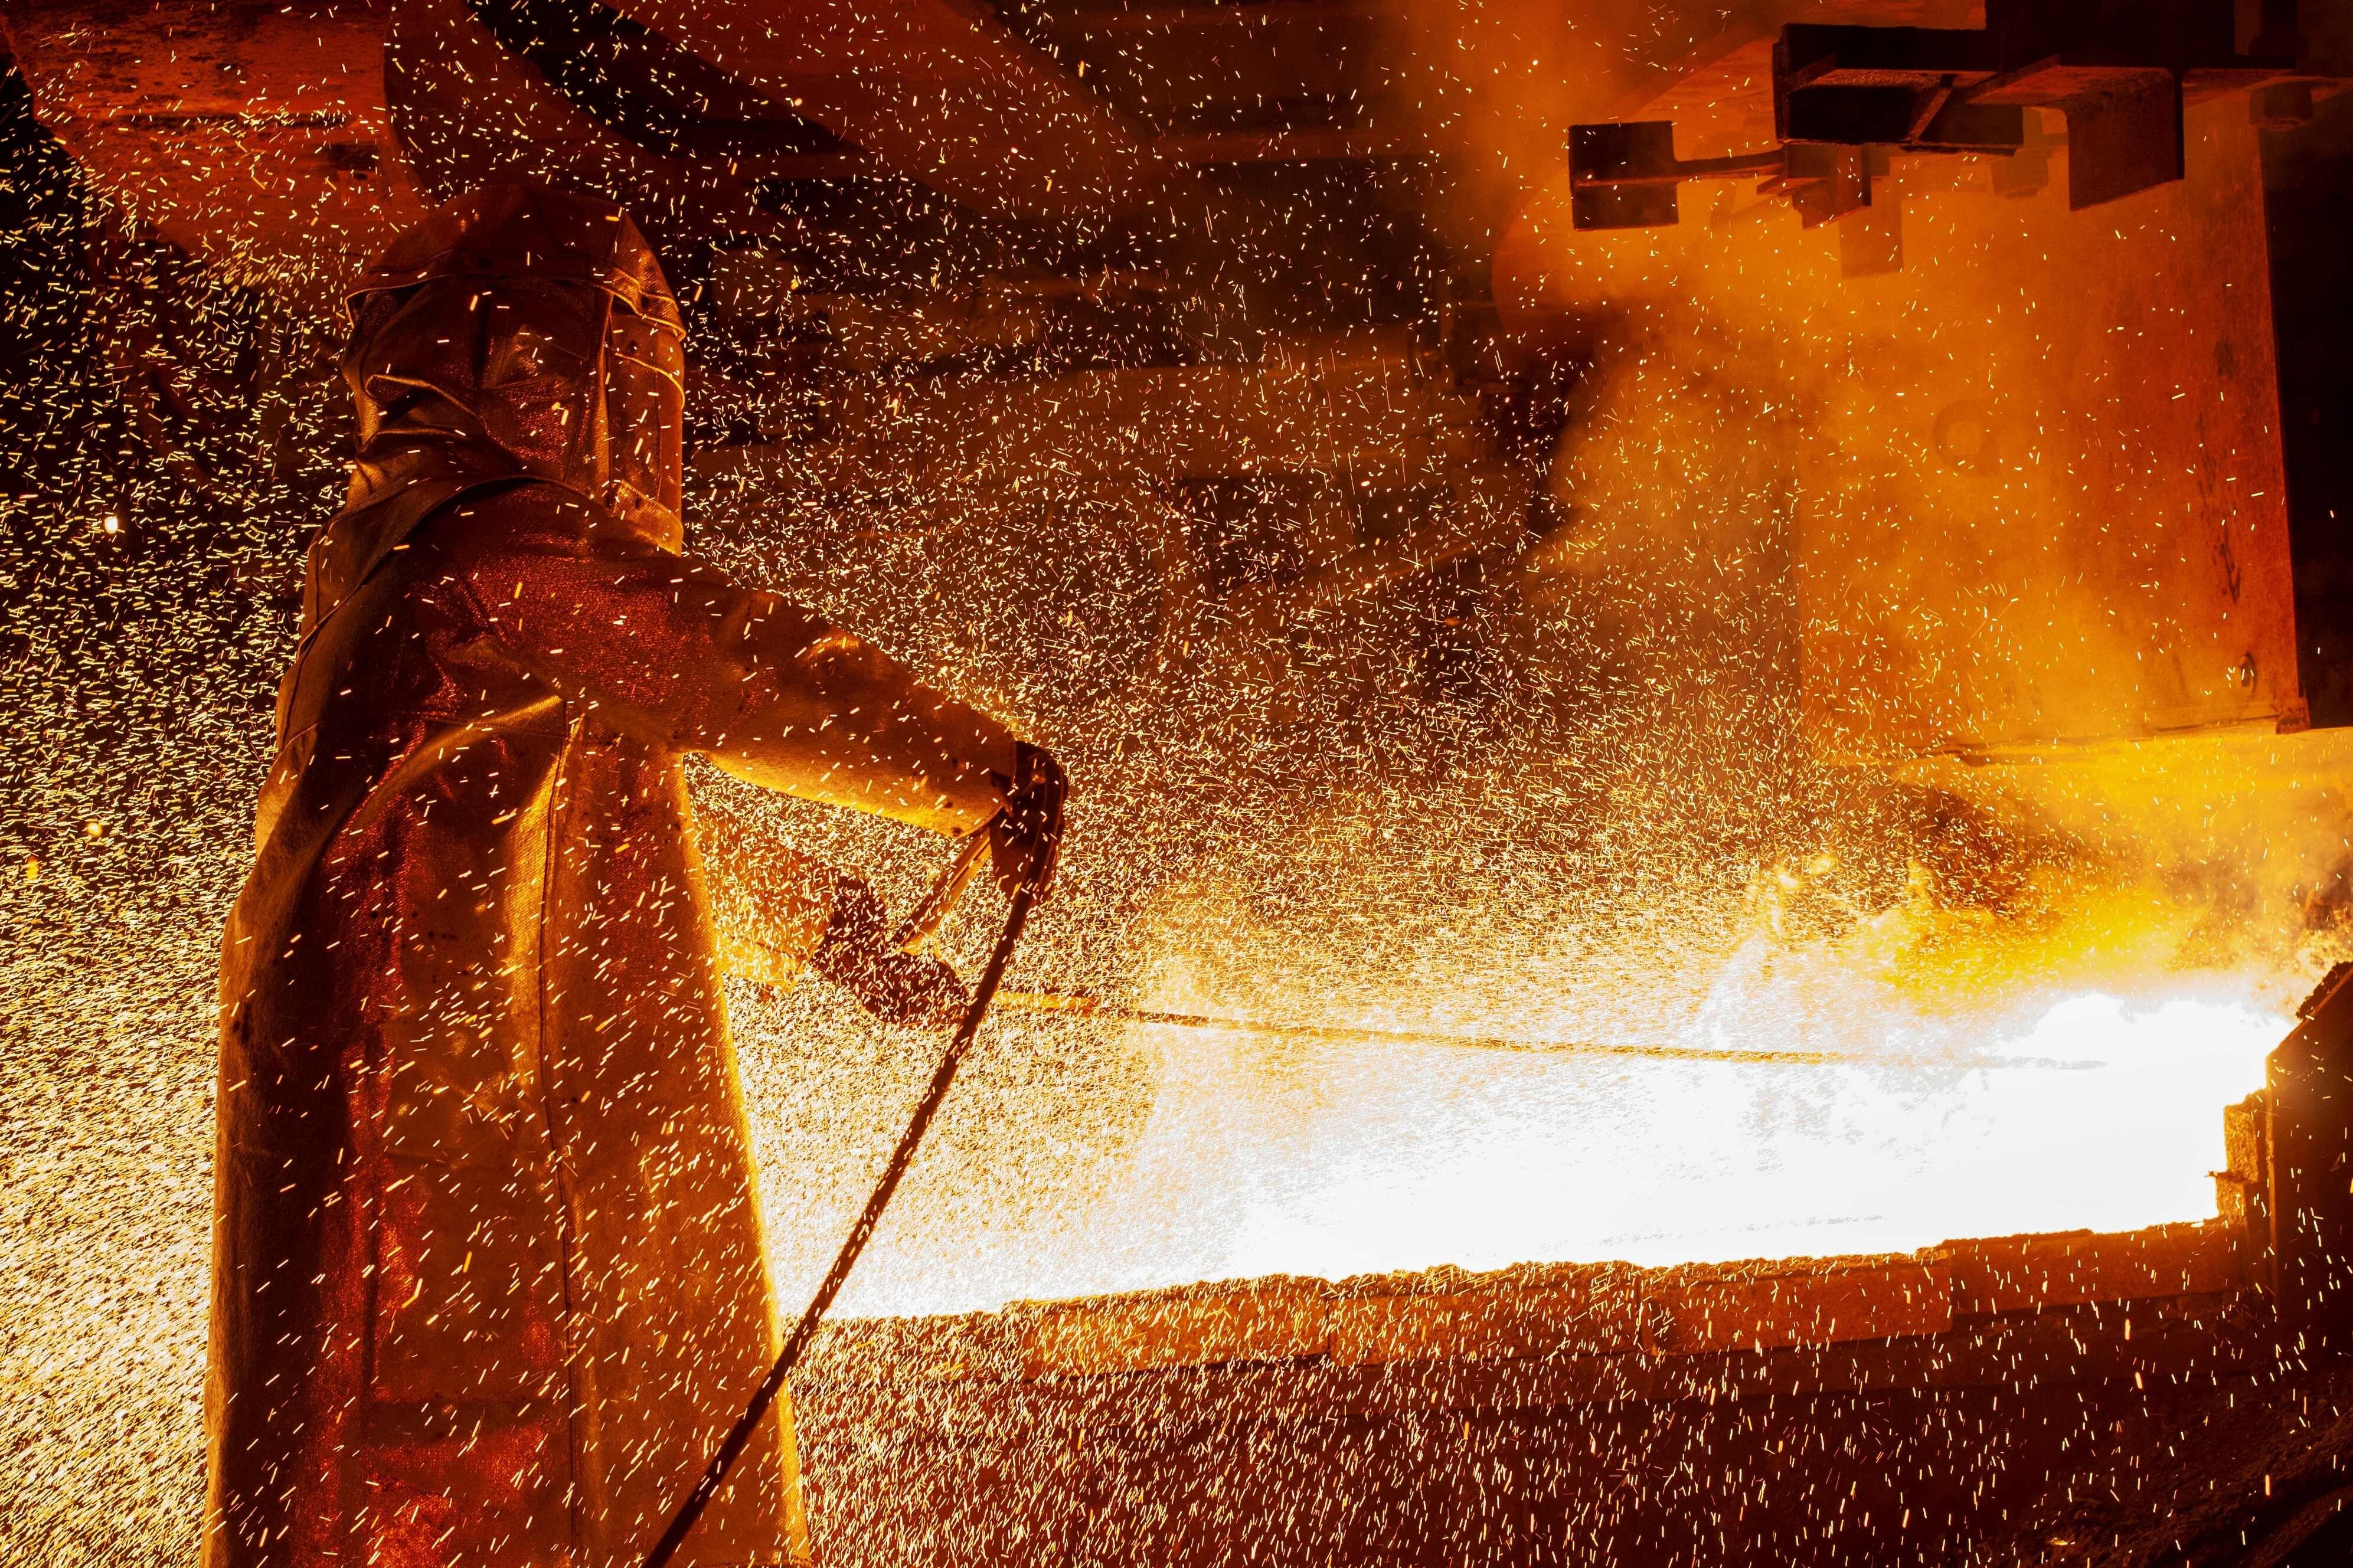 A worker mans a furnace during the nickel-smelting process at a plant in Indonesia. Photo: AFP